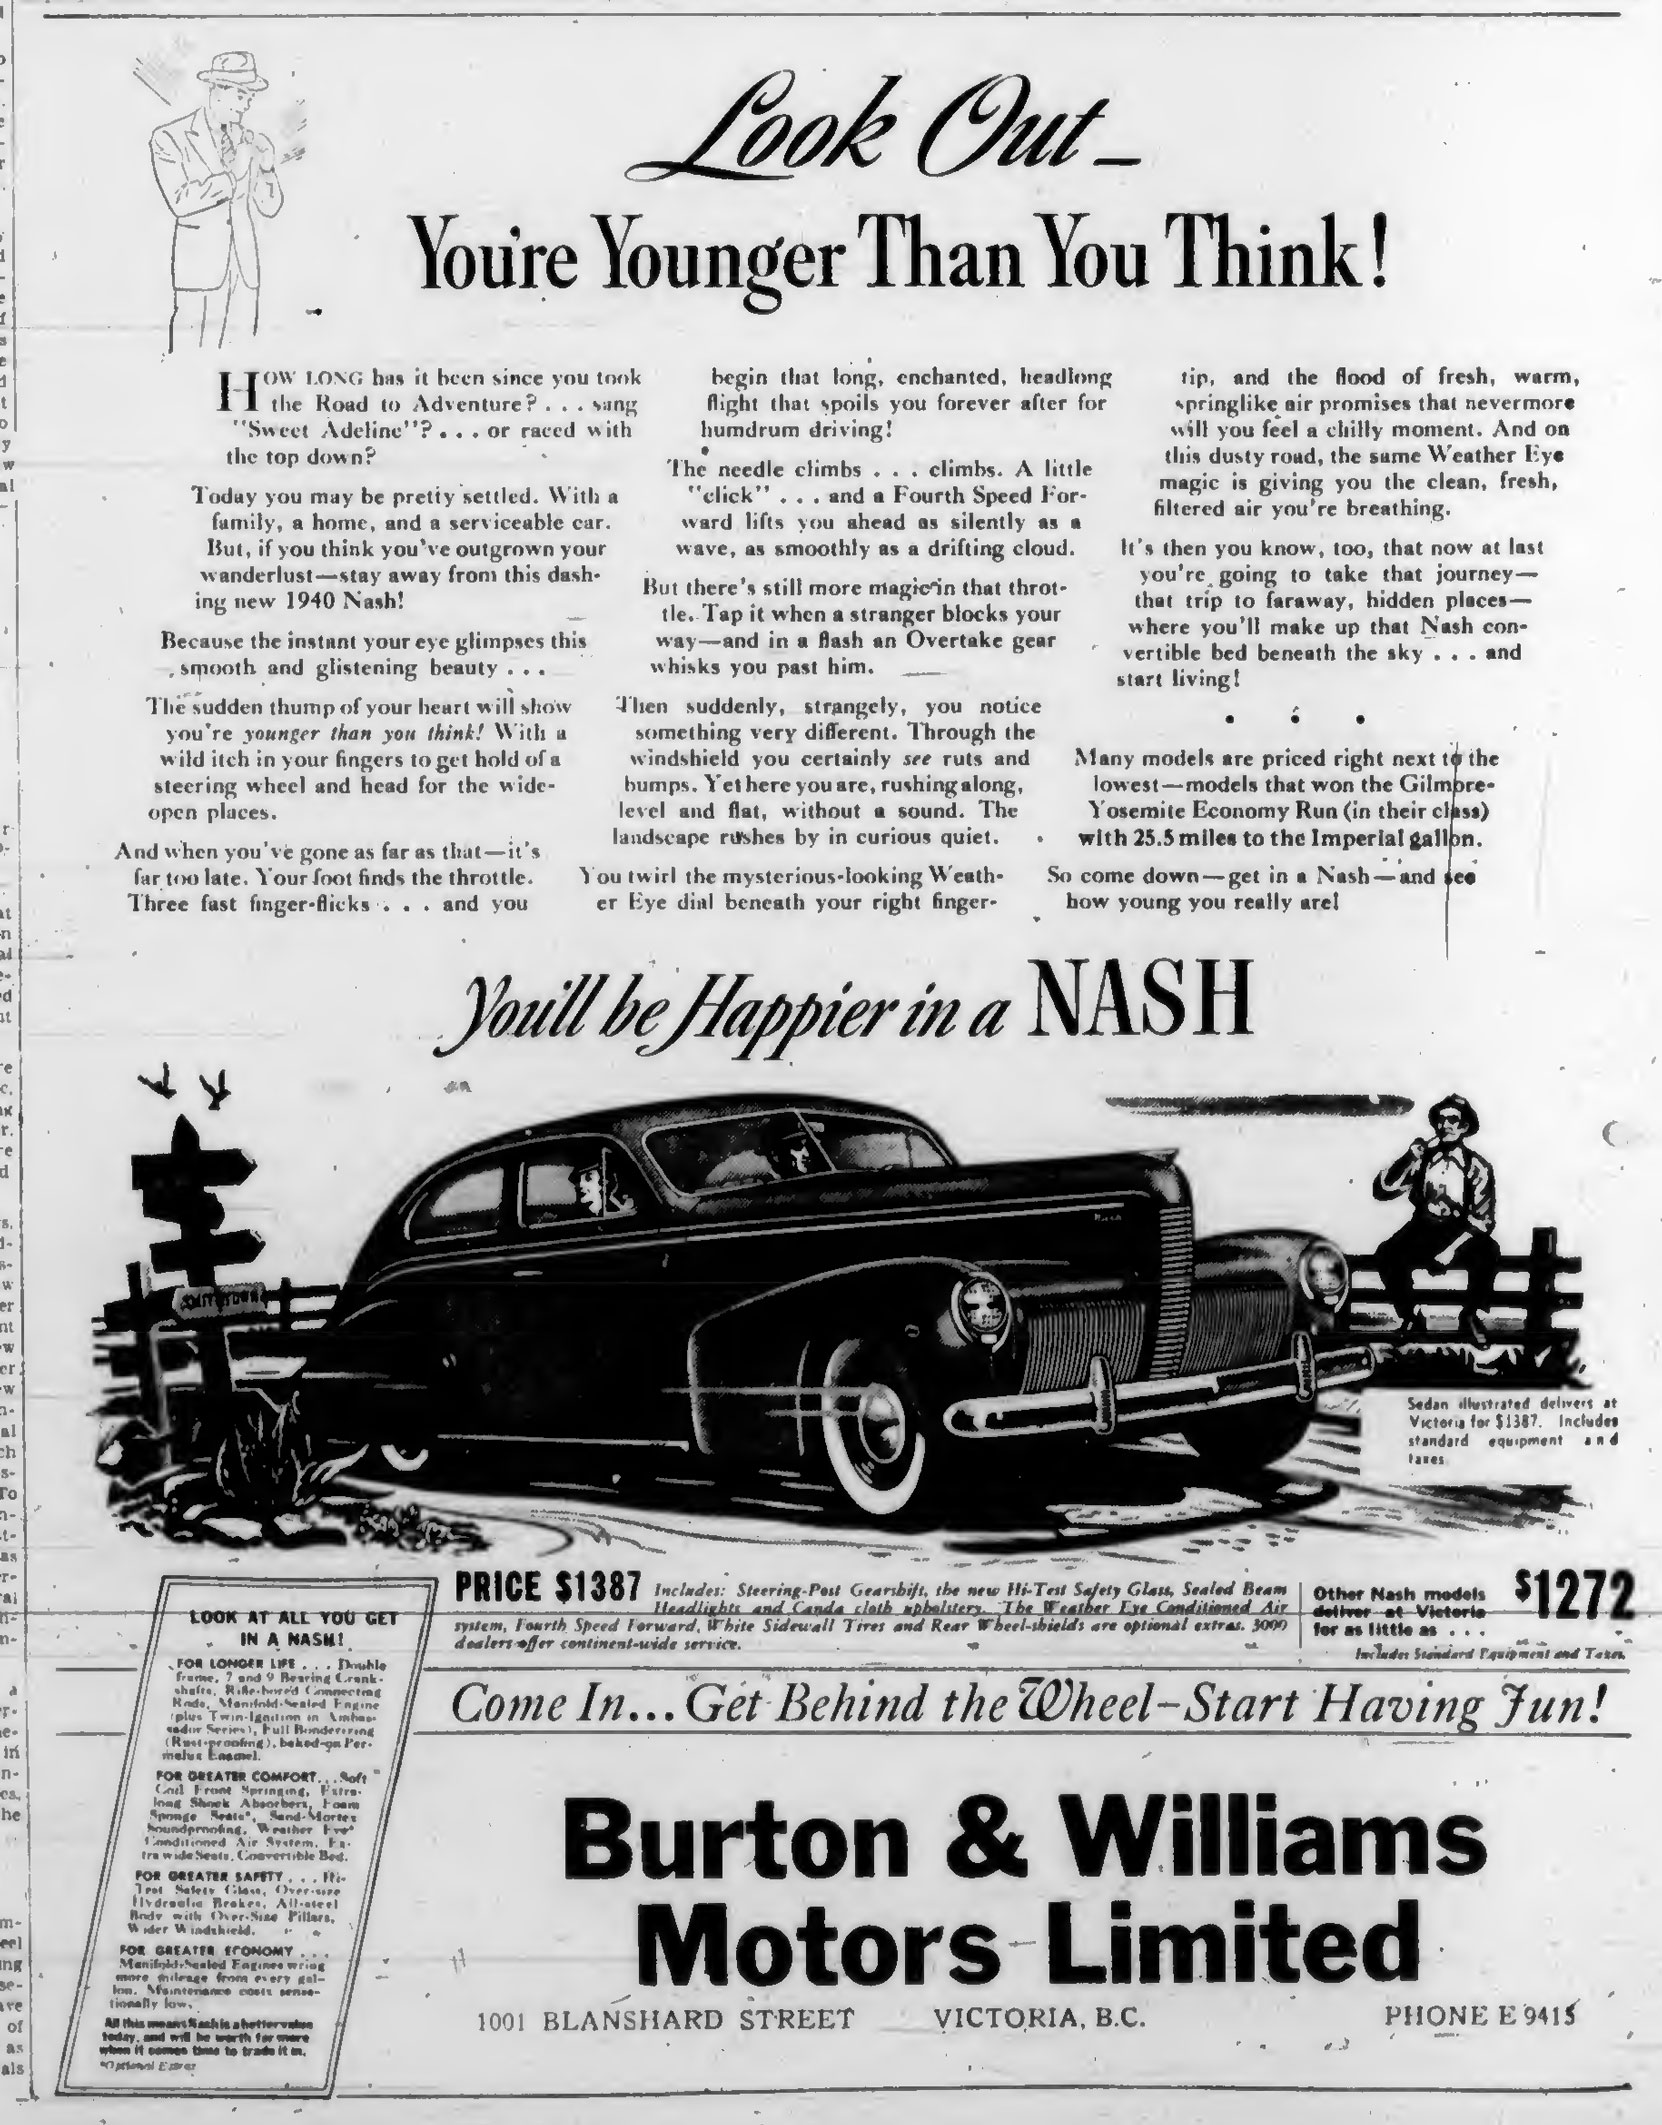 1940 advertisement for Nash automobiles, sold by Burton & Williams Motors Ltd., 1001 Blanshard Street. (Victoria Online Sightseeing Tours collection)